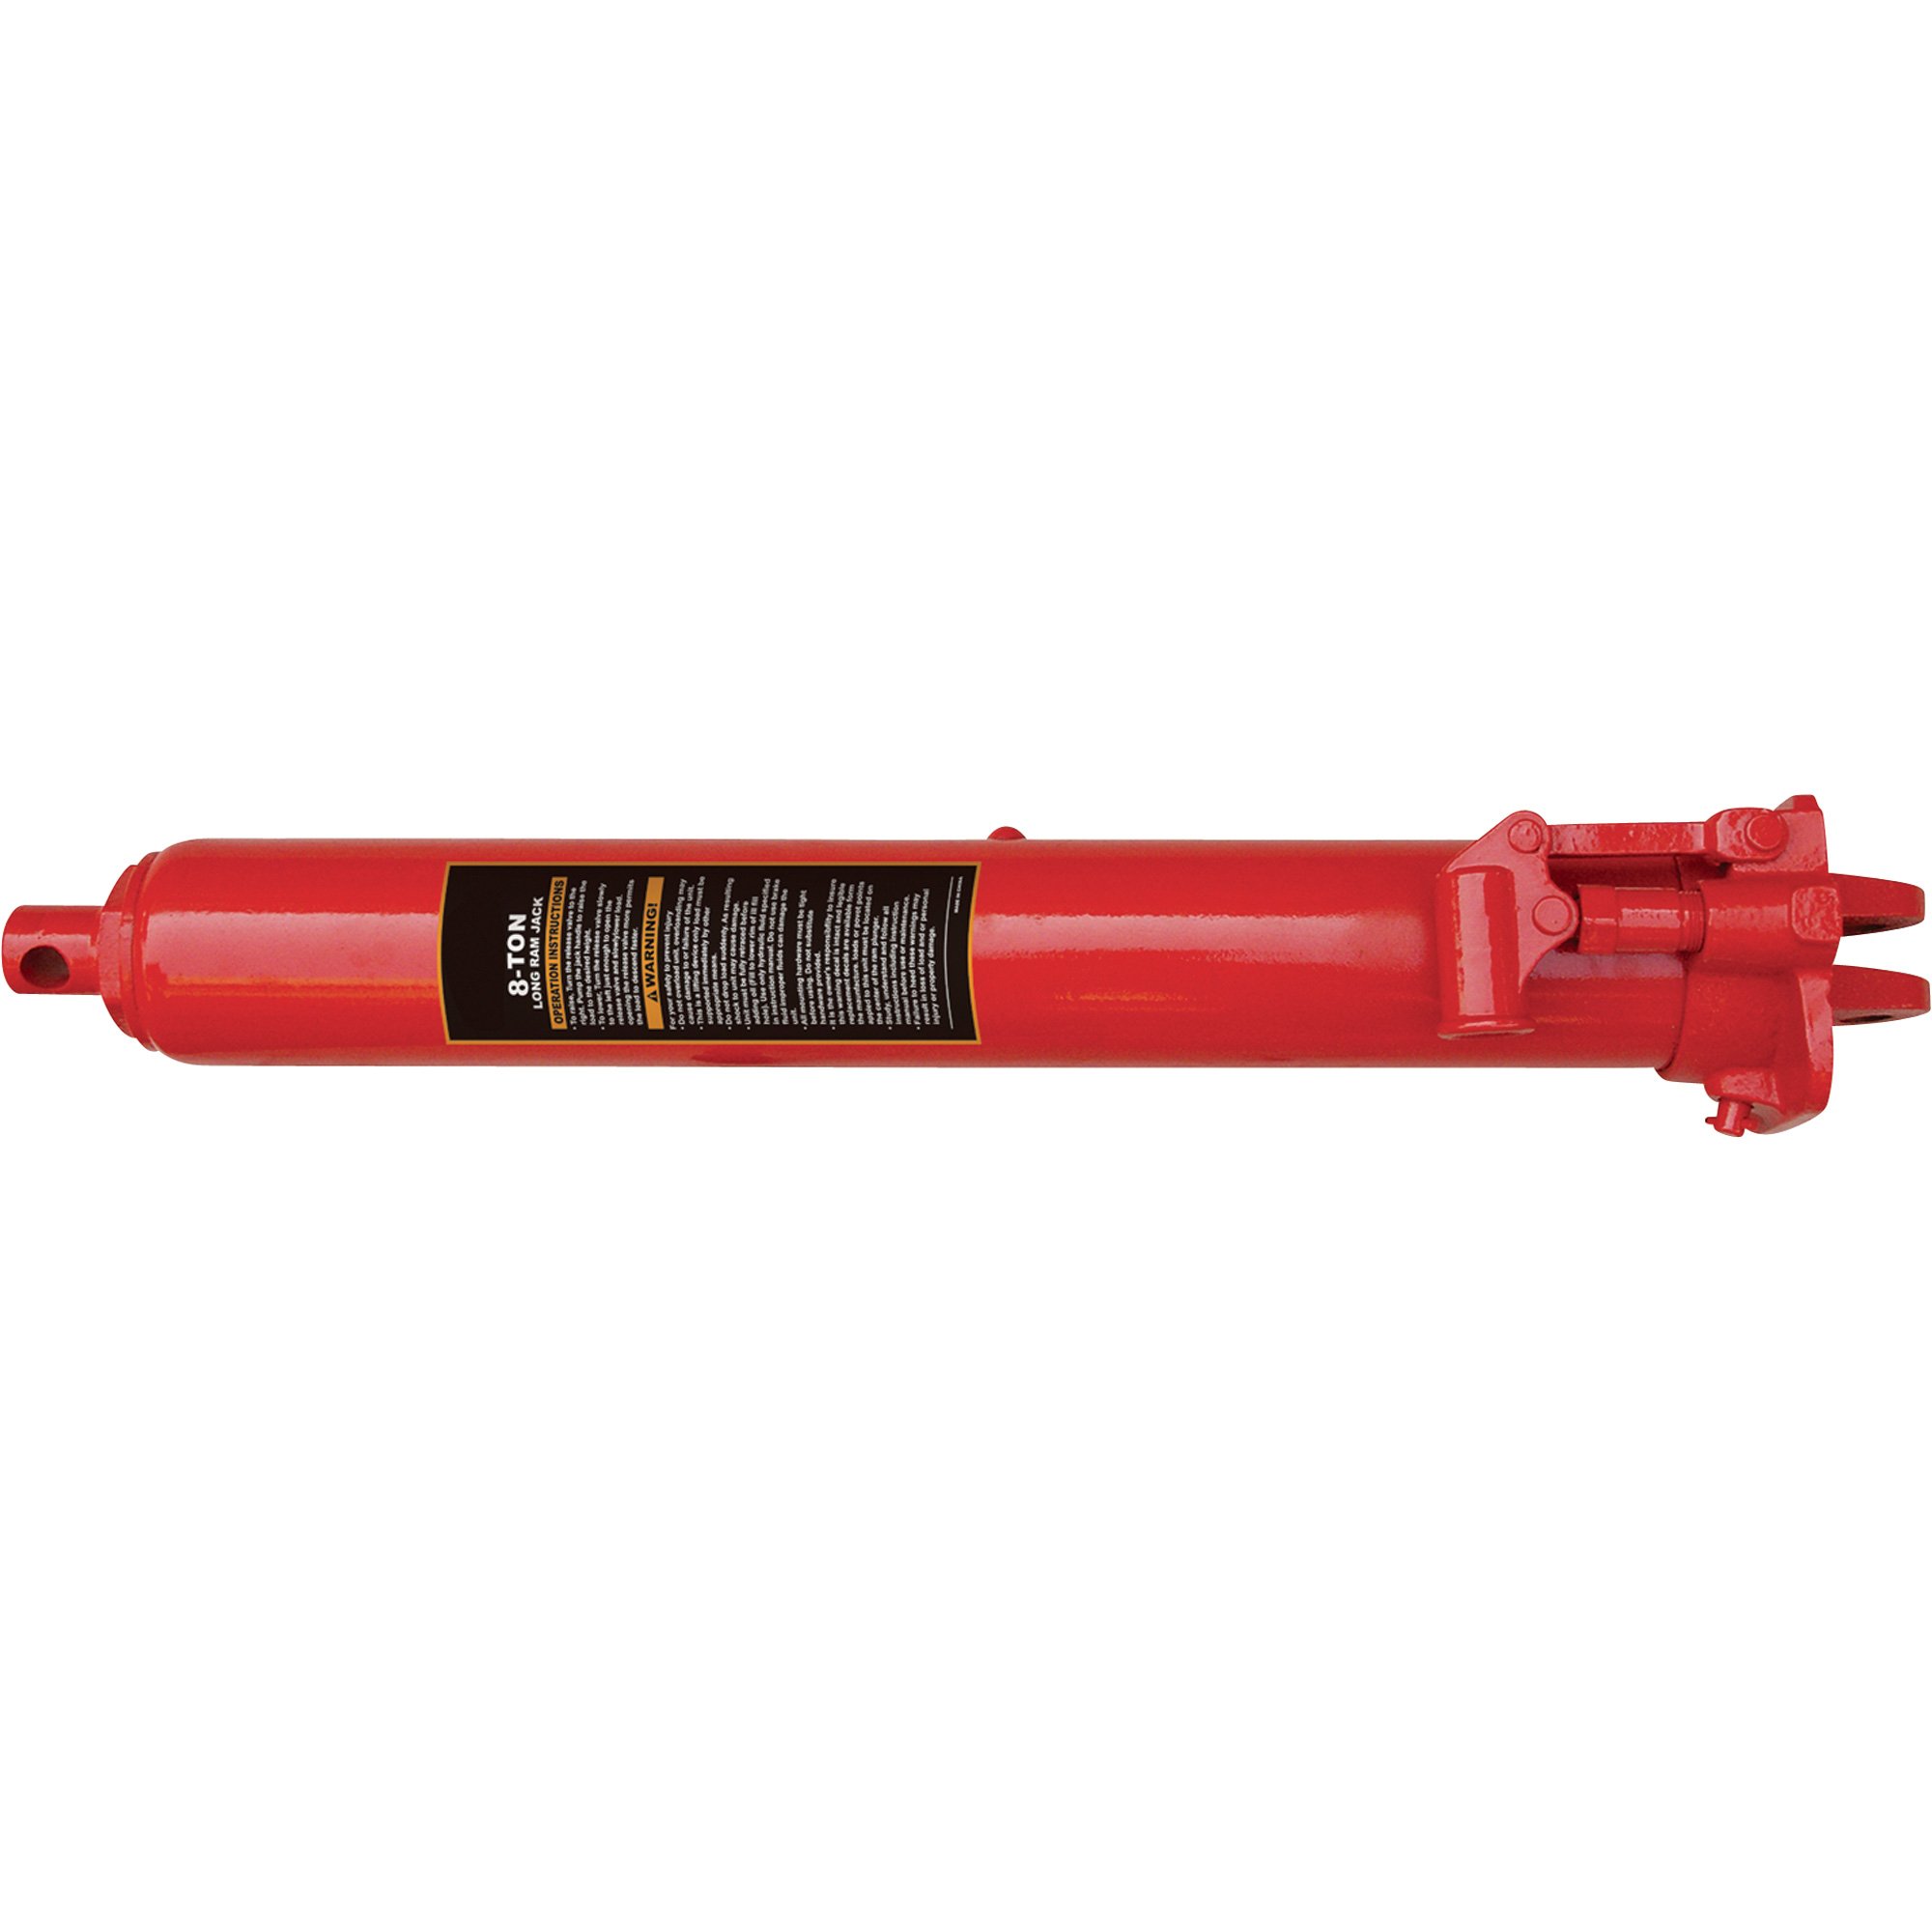 Please see replacement item# 46217. Torin Long Ram Double Piston Hydraulic  Jack — Ton, Clevis Bottom Style, Model# T30808 Northern Tool